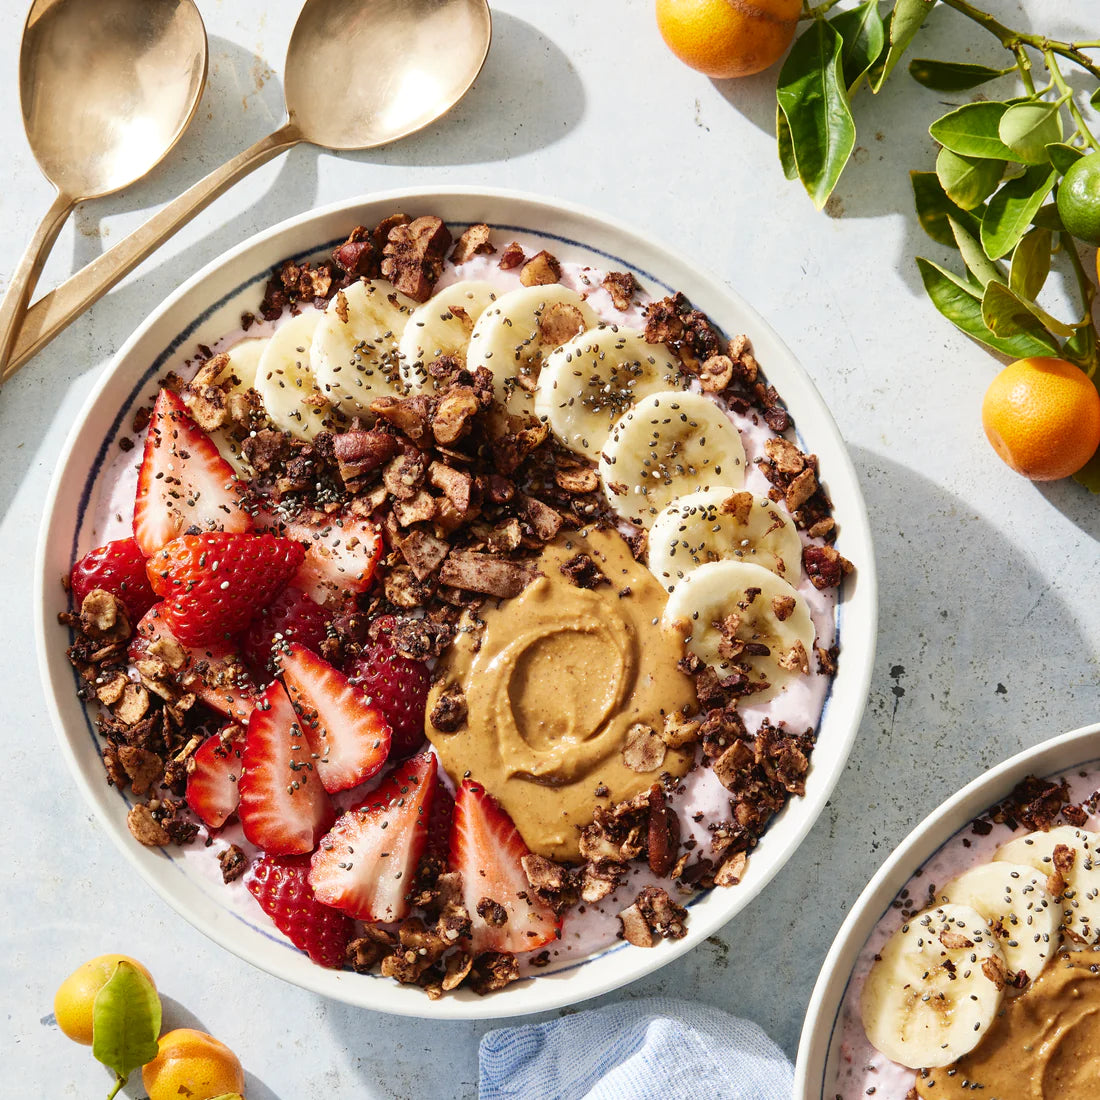 A yogurt bowl topped with strawberries, nut butter and rich Struesli cacao + coffee granola.